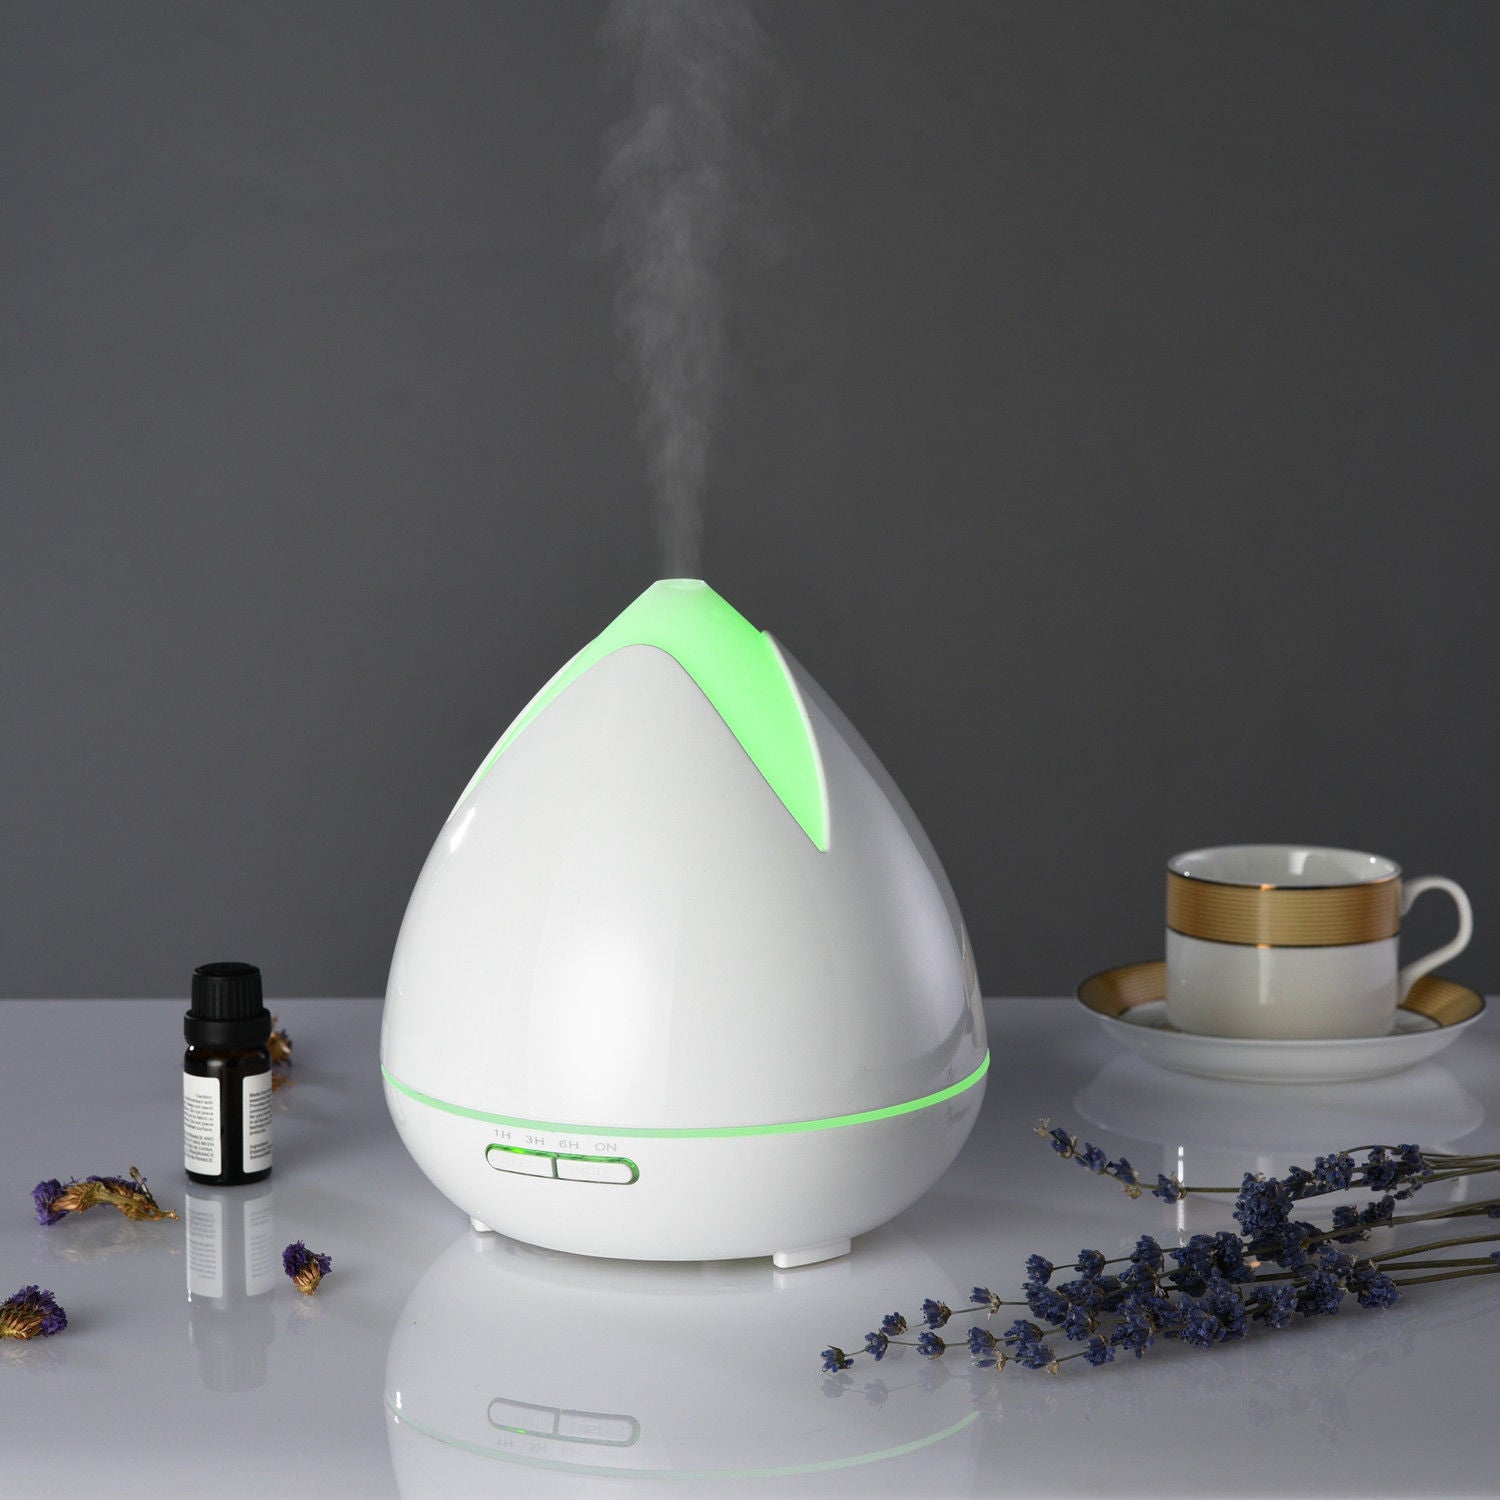 Essential Oils Ultrasonic Aromatherapy Diffuser Air Humidifier Purify 400ML - White - SILBERSHELL